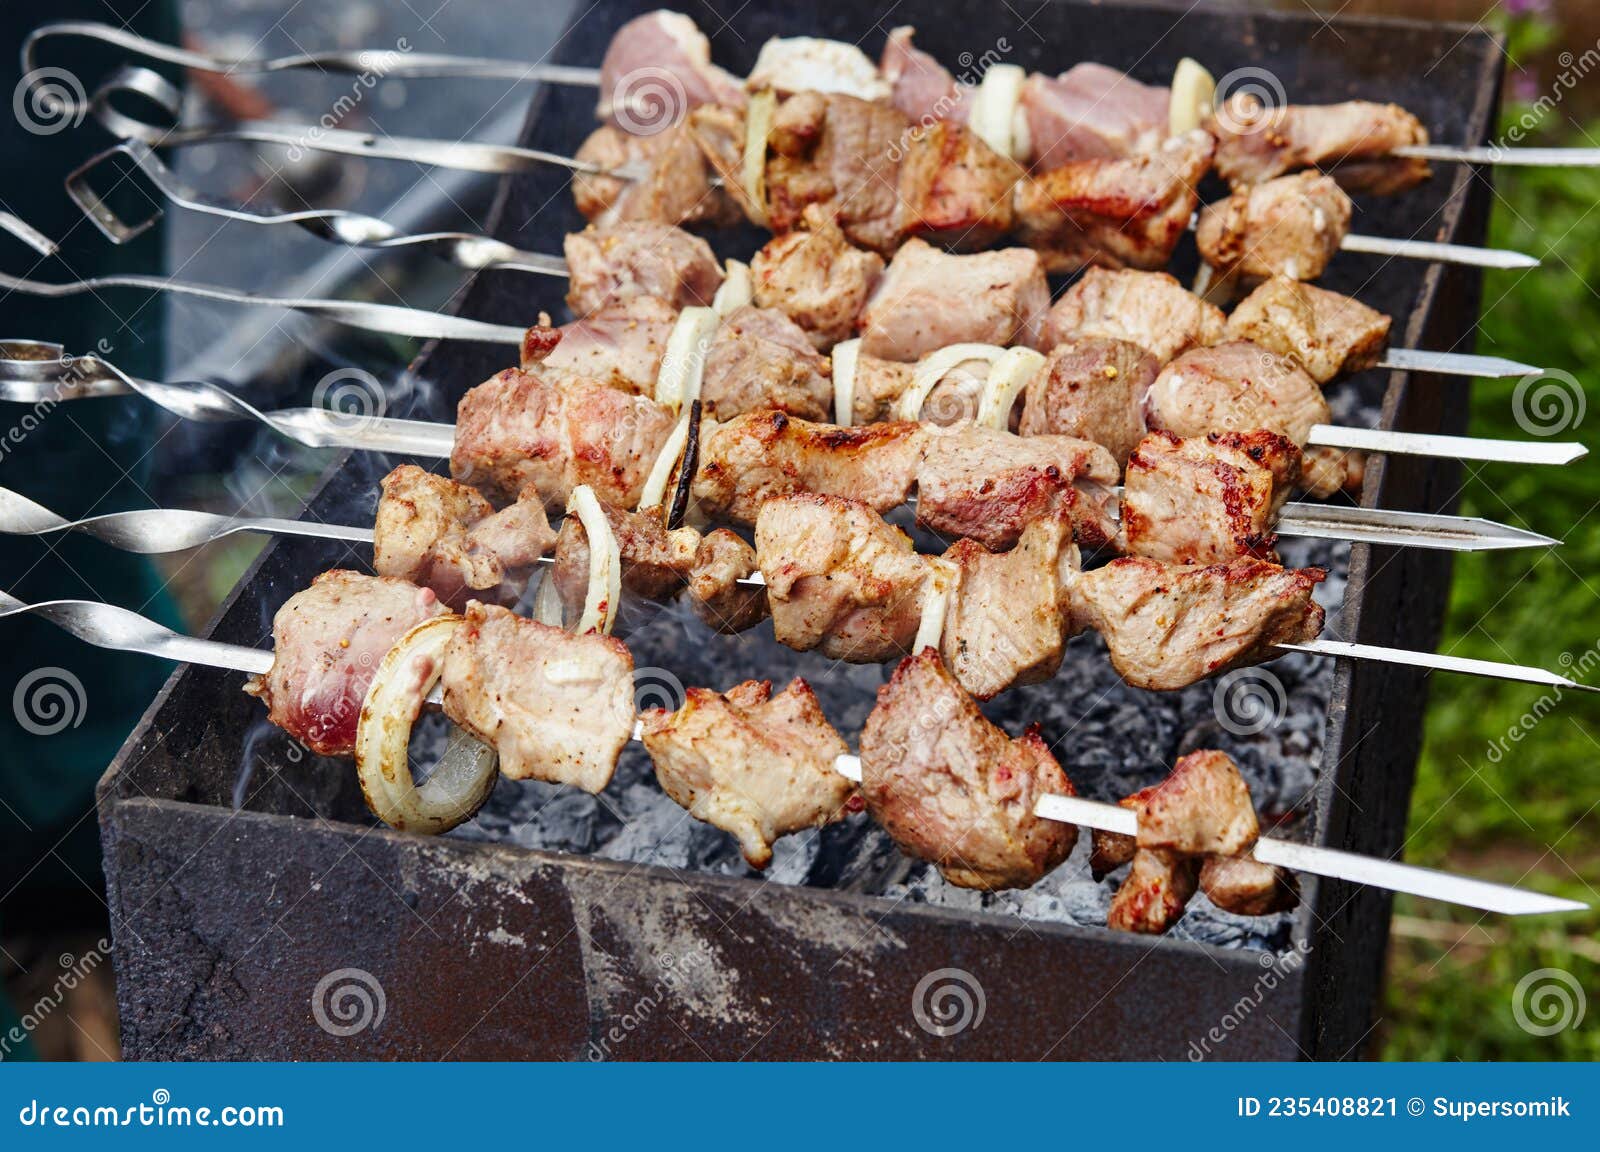 Marinated Shashlik Preparing on a Barbecue Grill Over Charcoal Stock ...